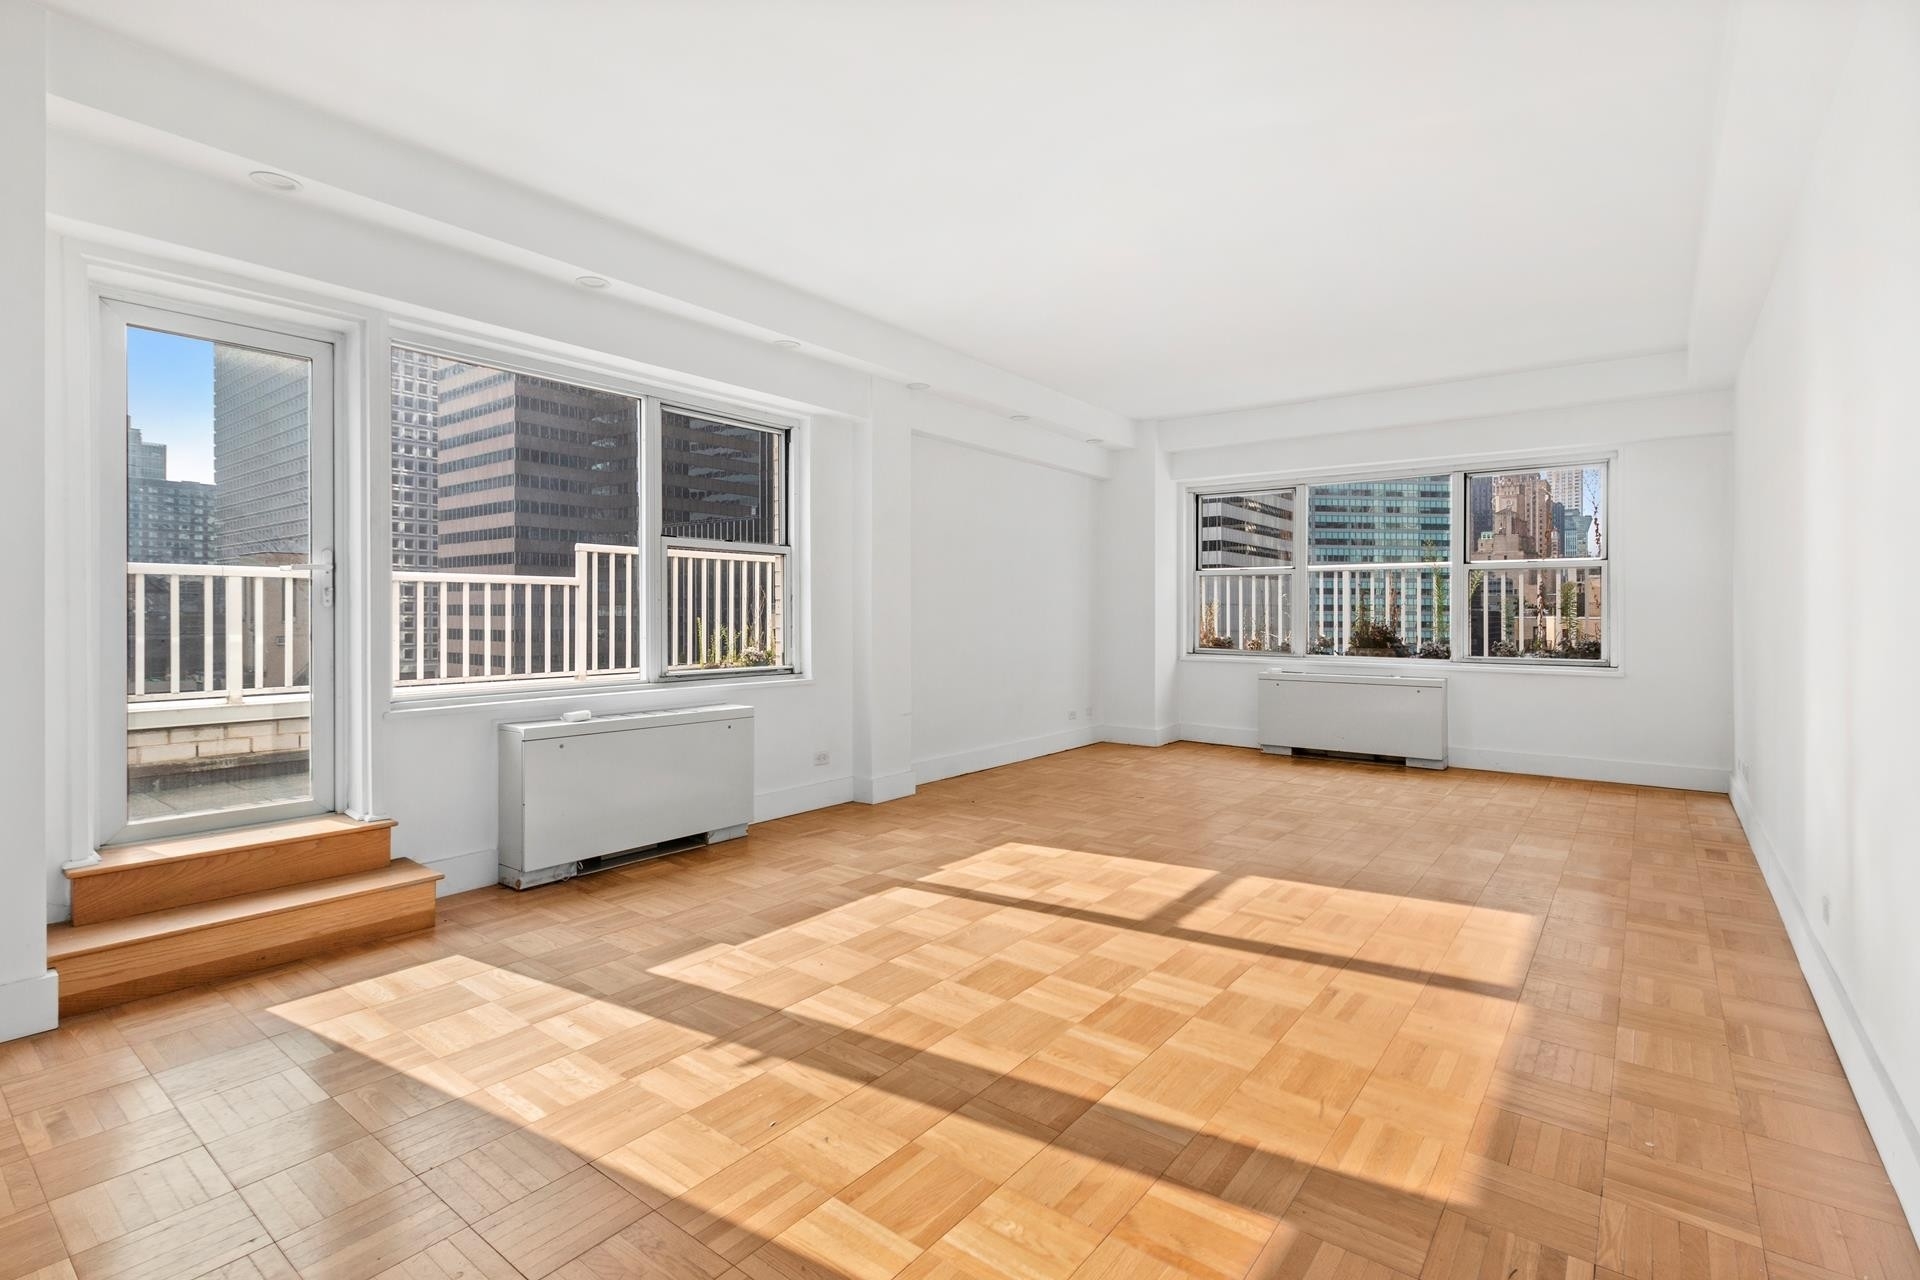 Co-op Properties for Sale at 136 E 56TH ST, PHD Midtown East, New York, New York 10022